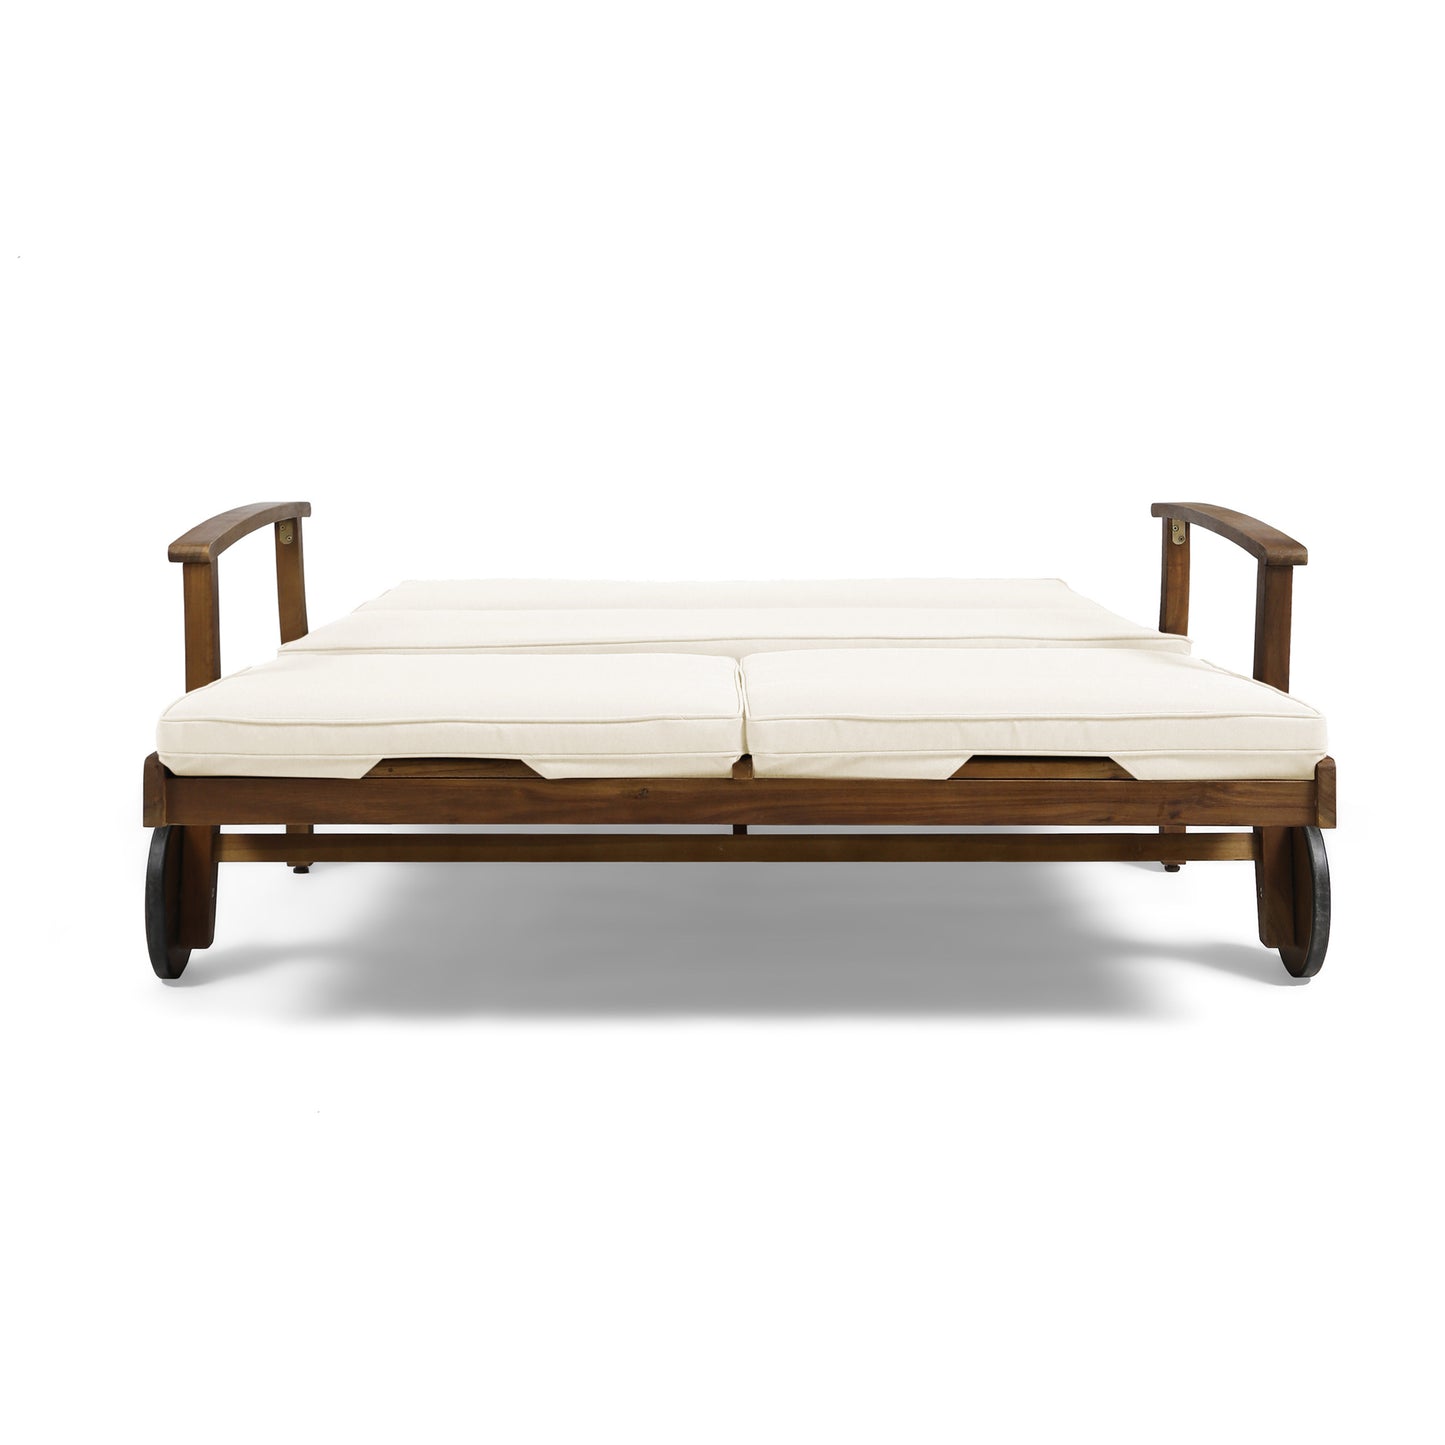 Samantha Double Chaise Lounge for Yard and Patio, Acacia Wood Frame